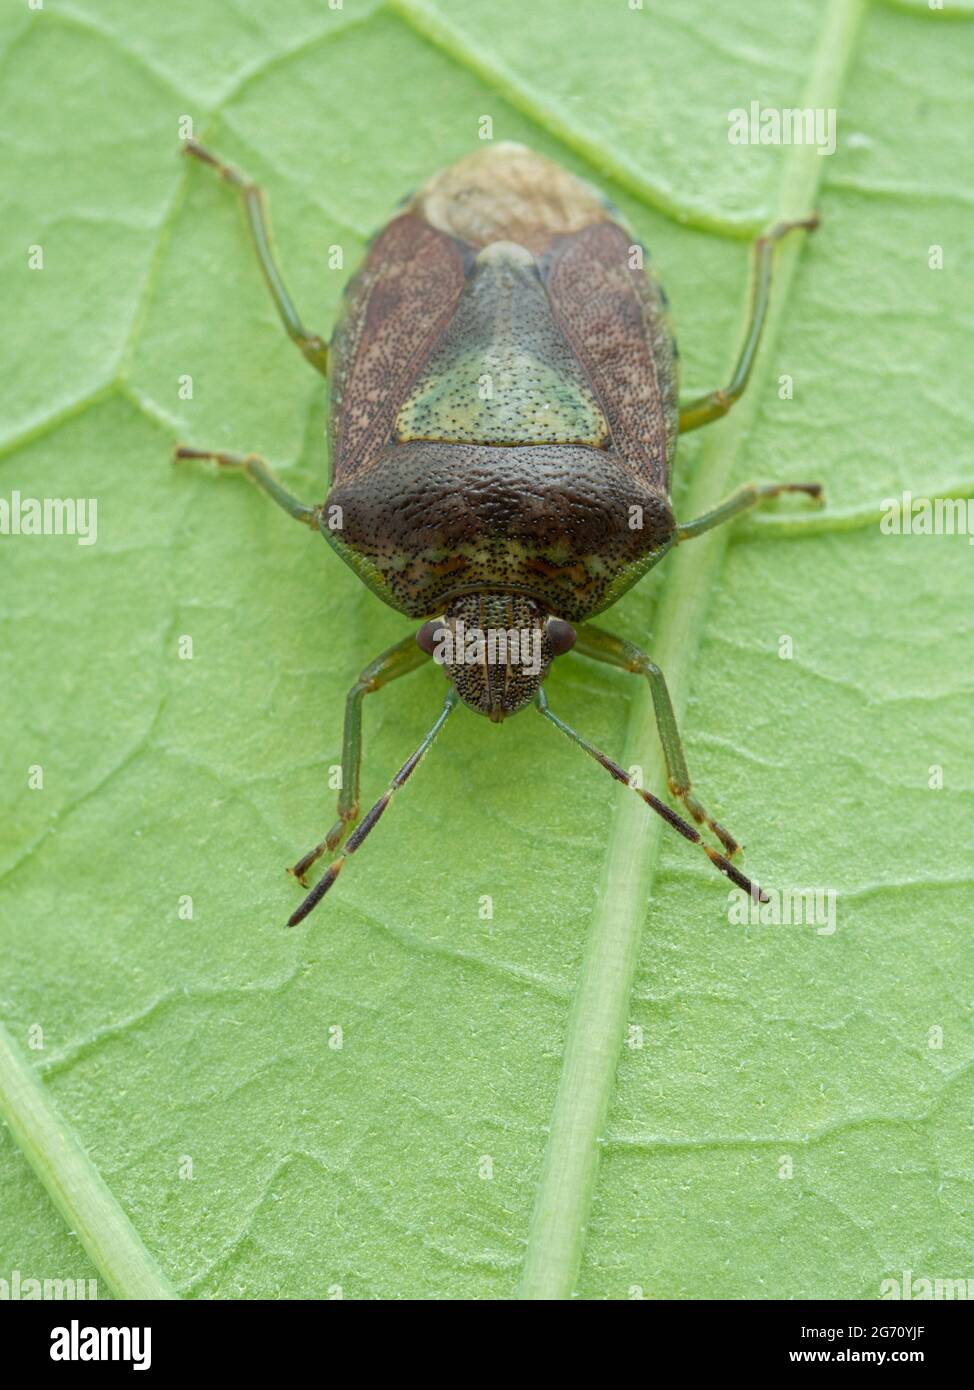 vertical image of a green burgundy stink bug (Banasa dimidiata) from above, walking on a leaf Stock Photo